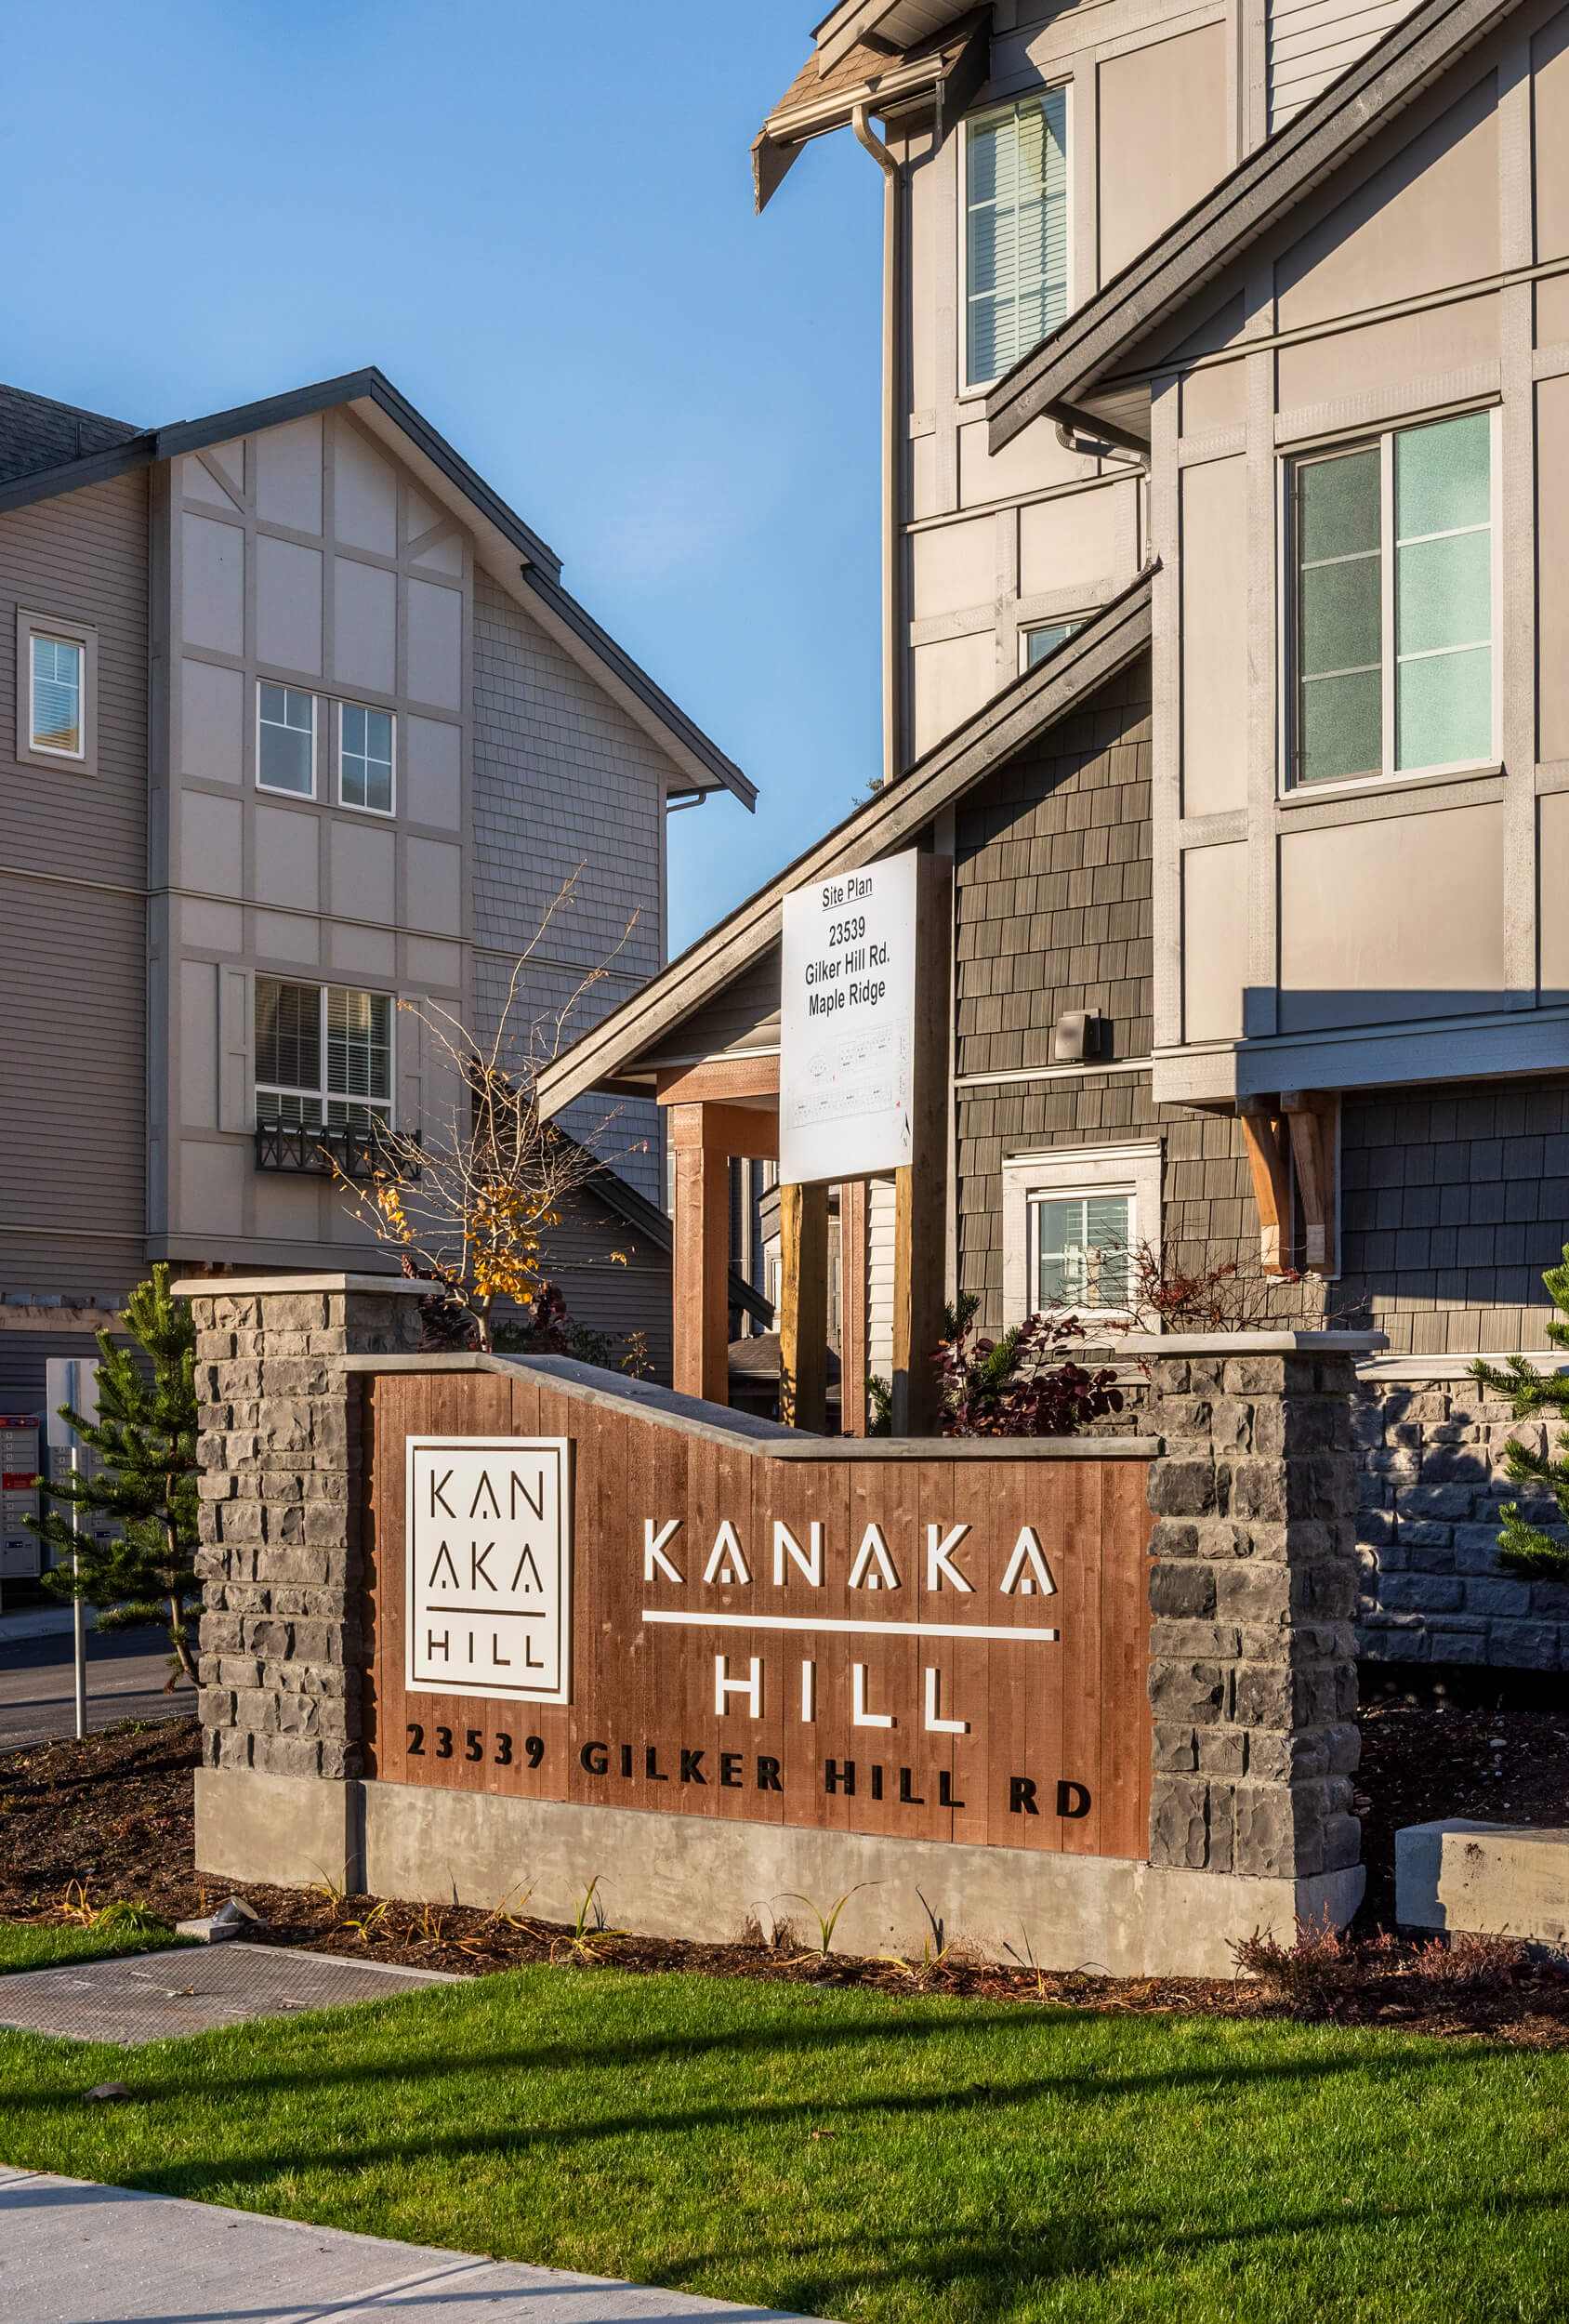 The “Kanaka Hill” development is a multi-family townhome project in Maple Ridge. Design by Group 161 | Atelier Pacific Architecture.